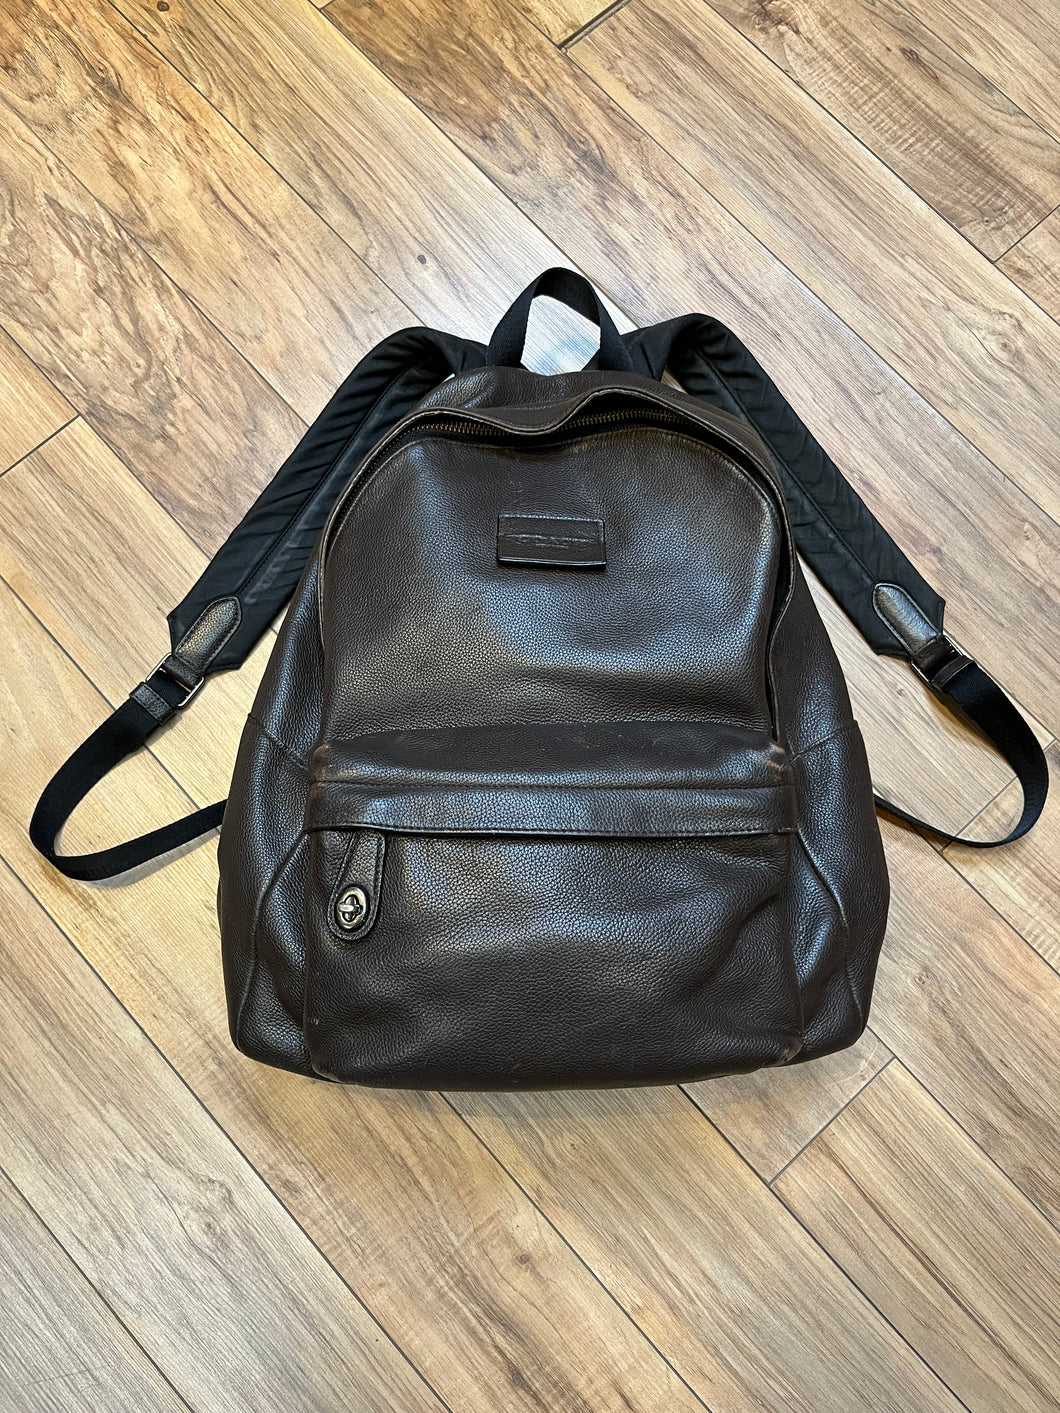 Authentic Coach brown pebble leather knapsack with adjustable shoulder straps, multiple pockets inside the large main compartment and one small compartment on the front with turn key detail.